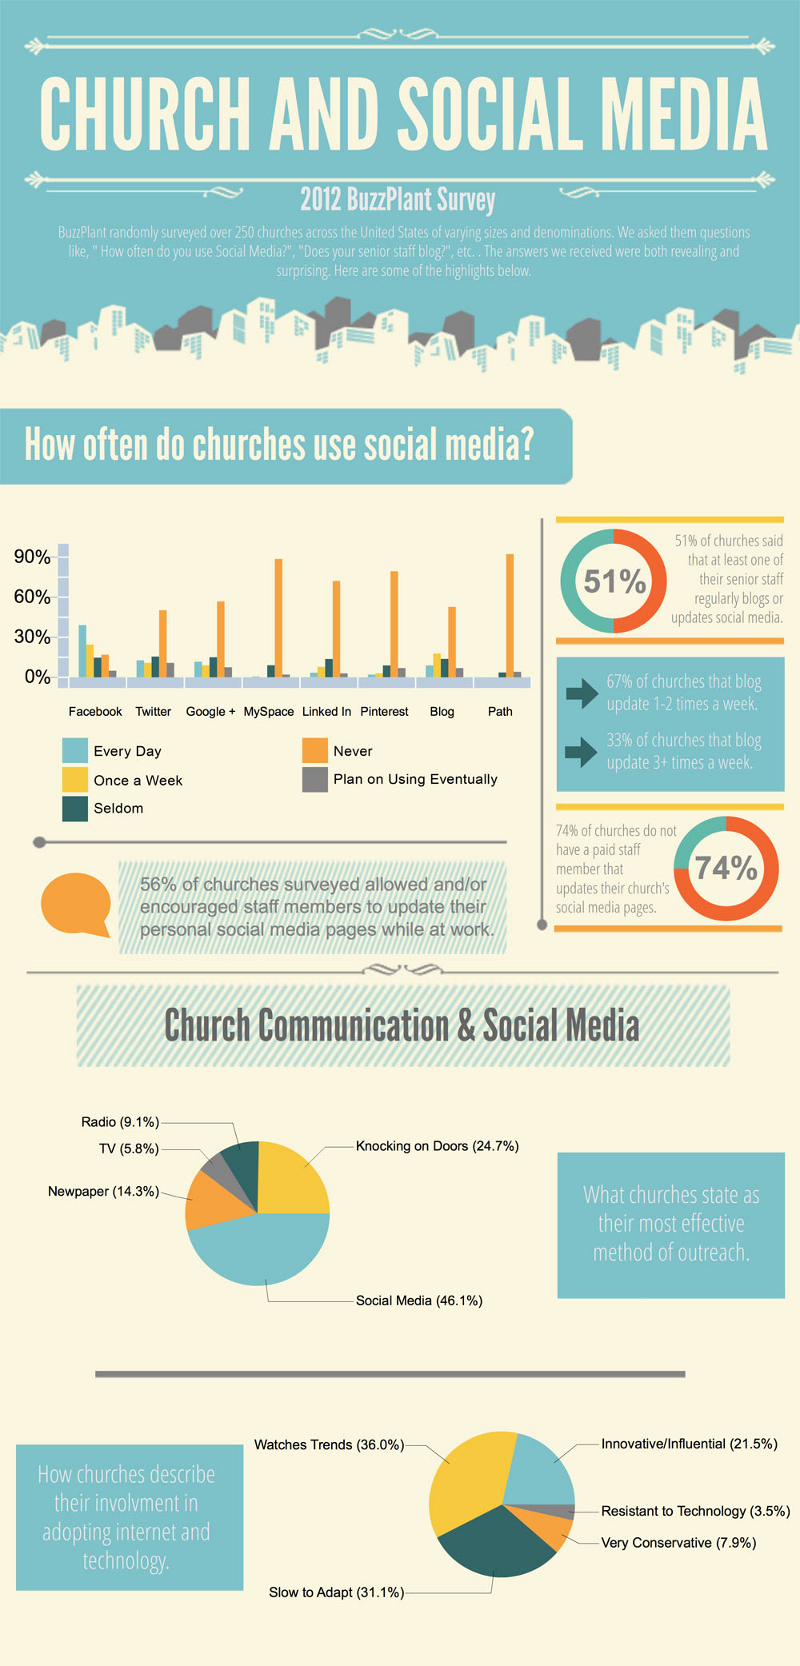 Church and Social Media Trends